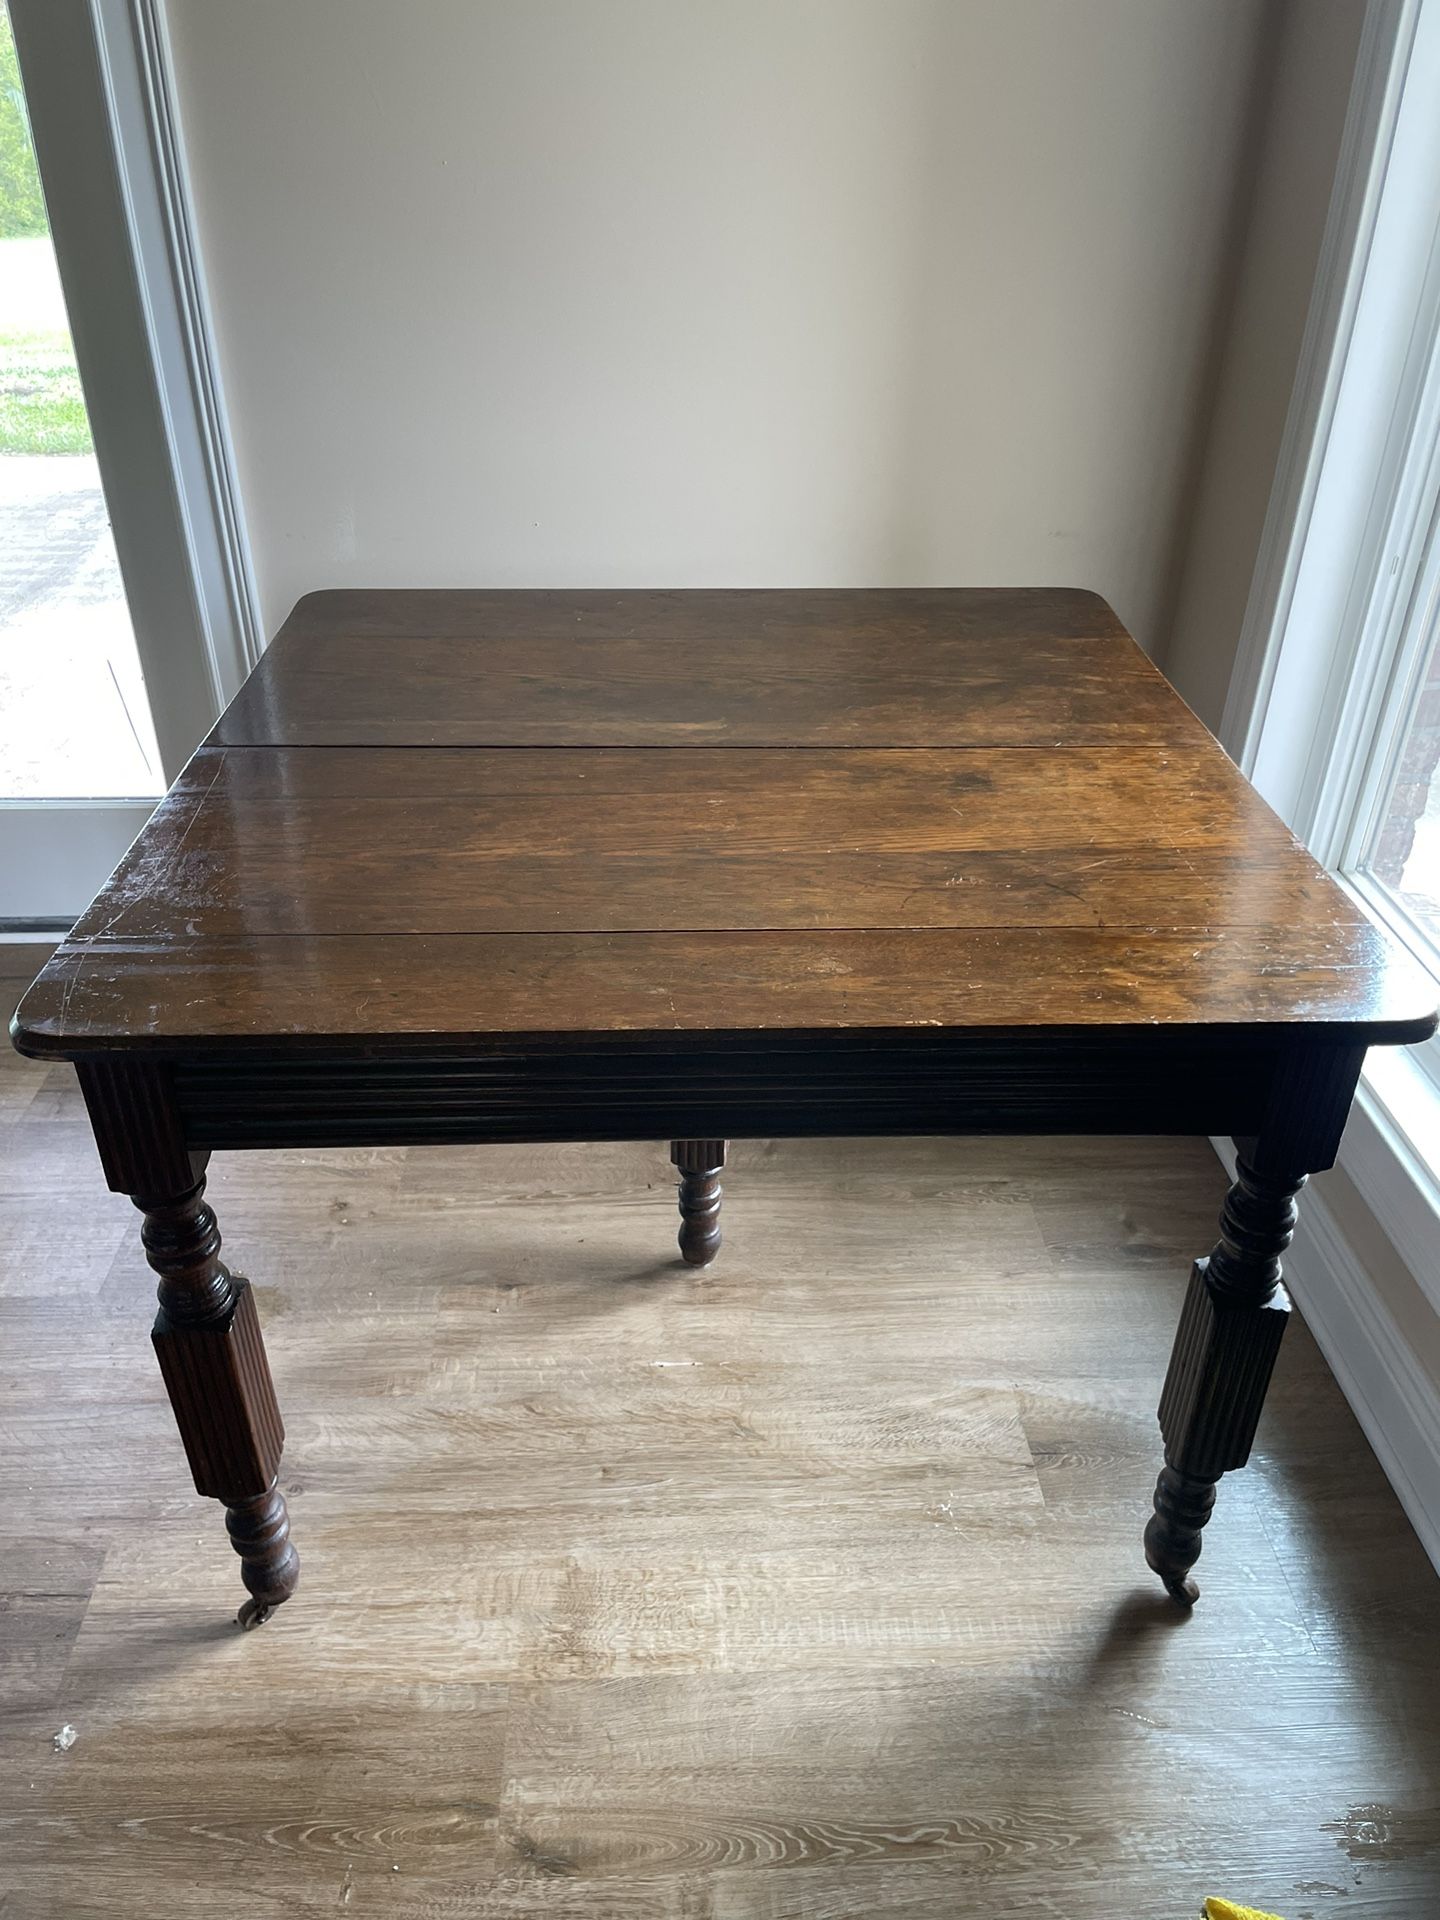 Antique 5 Leg Dining Table With 2 Leaves